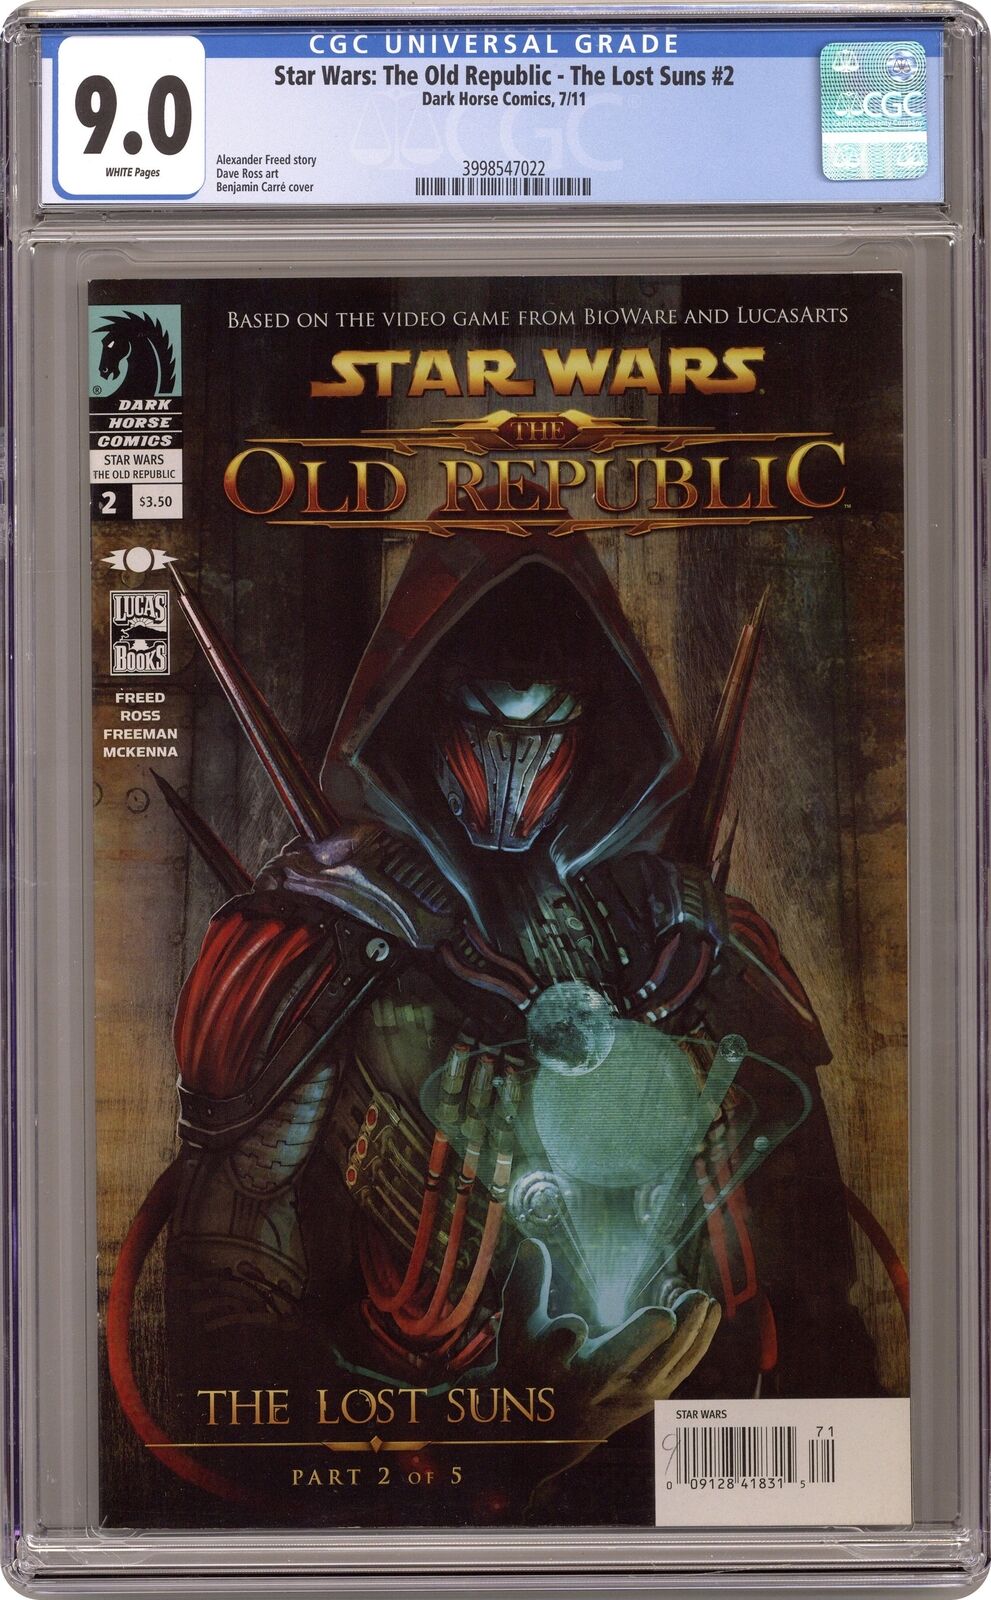 Star Wars The Old Republic The Lost Suns #2 CGC 9.0 2011 3998547022